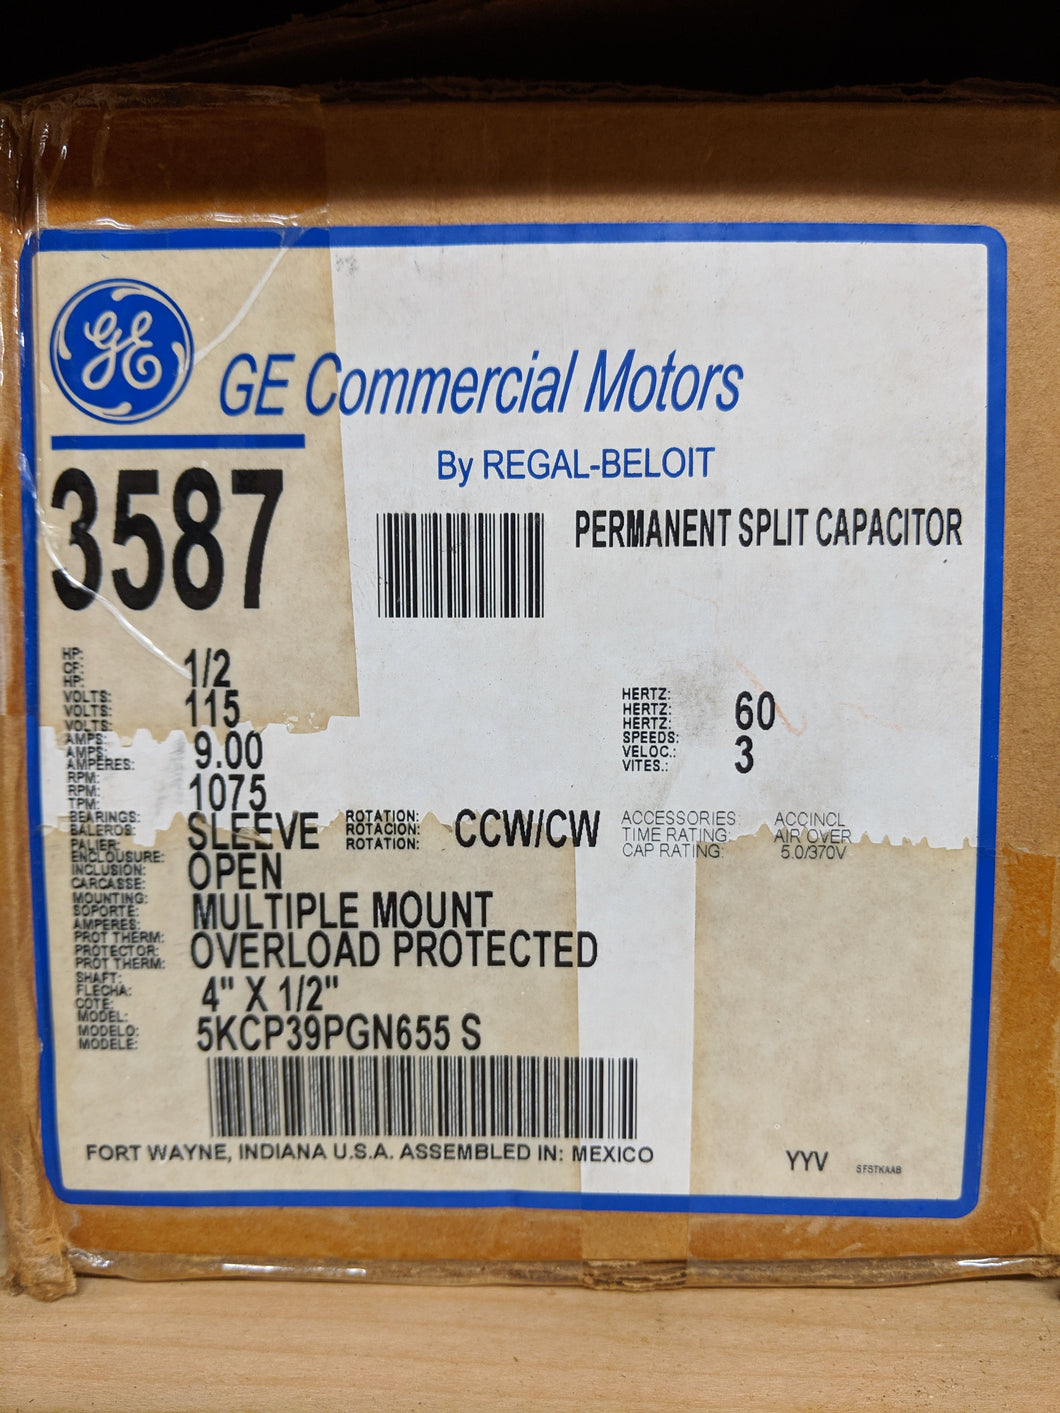 GE 3587, 1/2 HP, 115 Volts, 5KCP39PGN655S